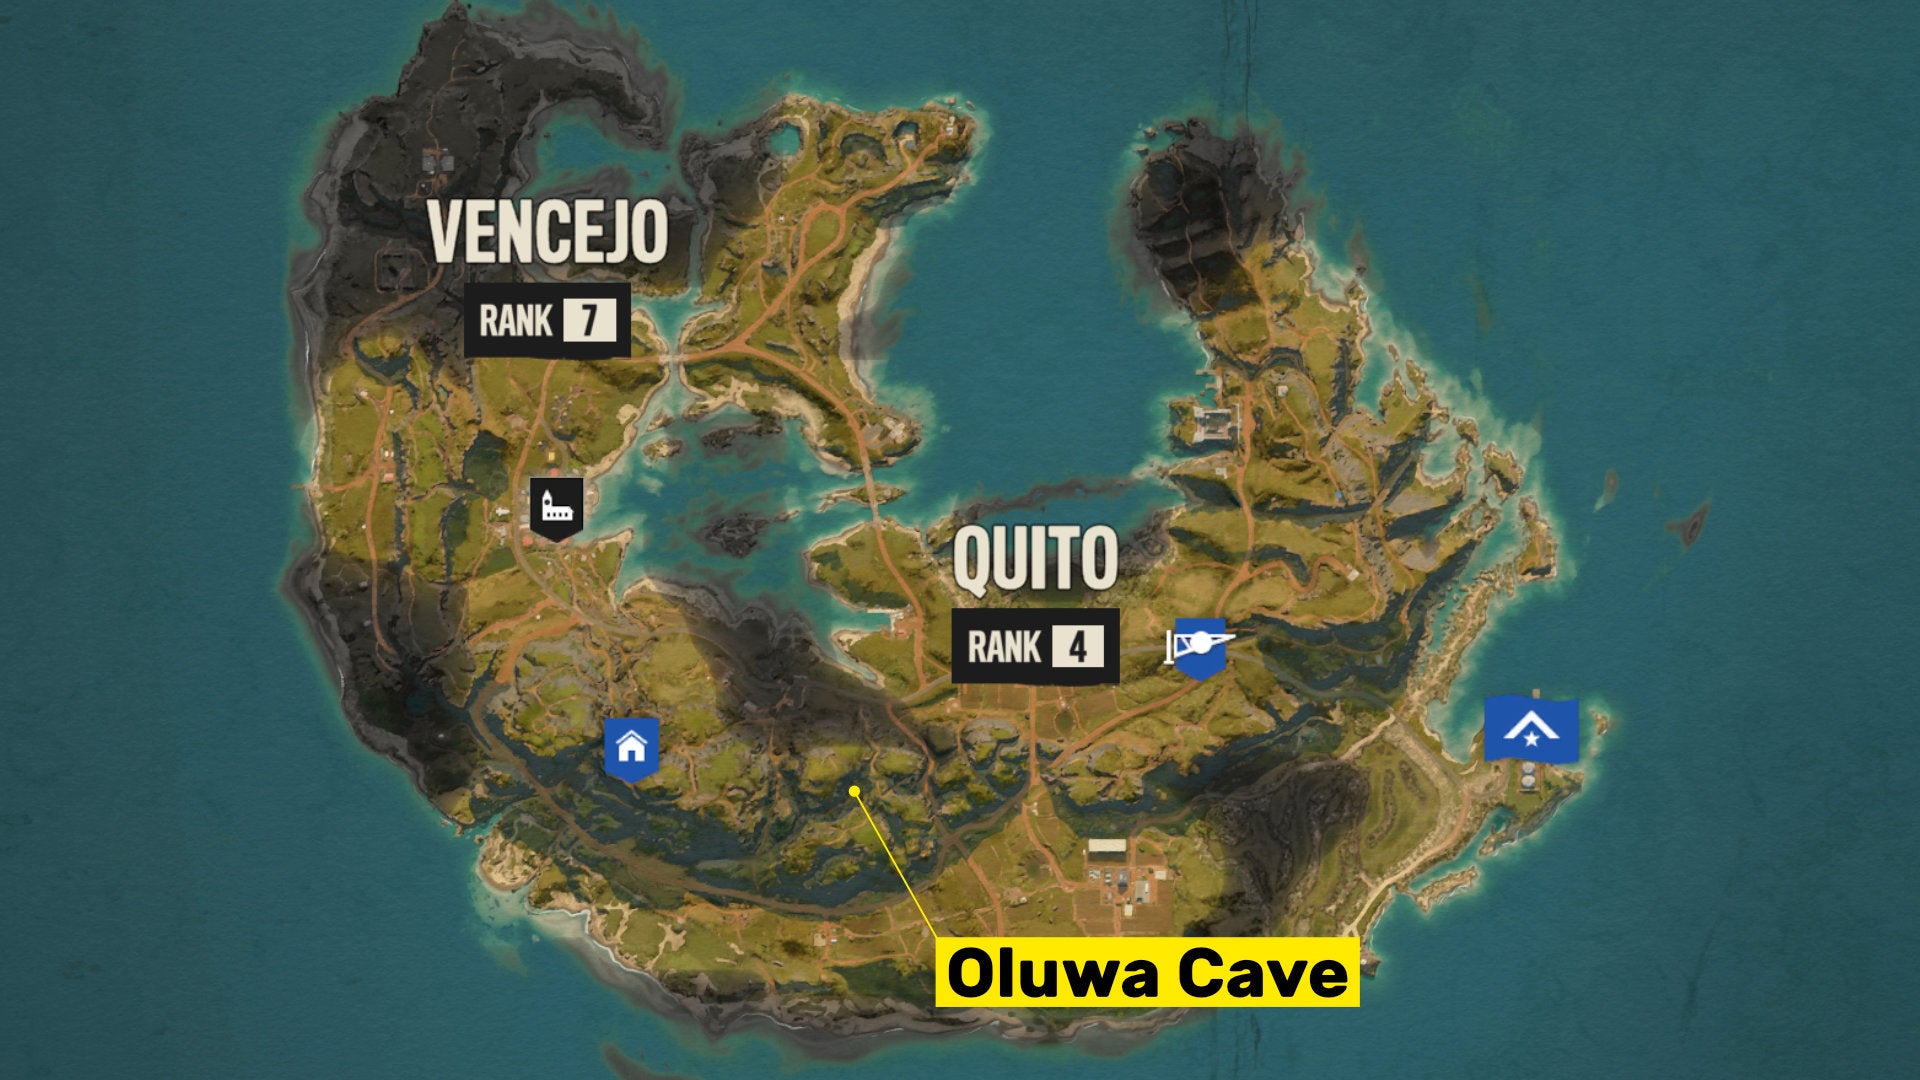 A screenshot of the Far Cry 6 map with the location of Oluwa Cave highlighted.